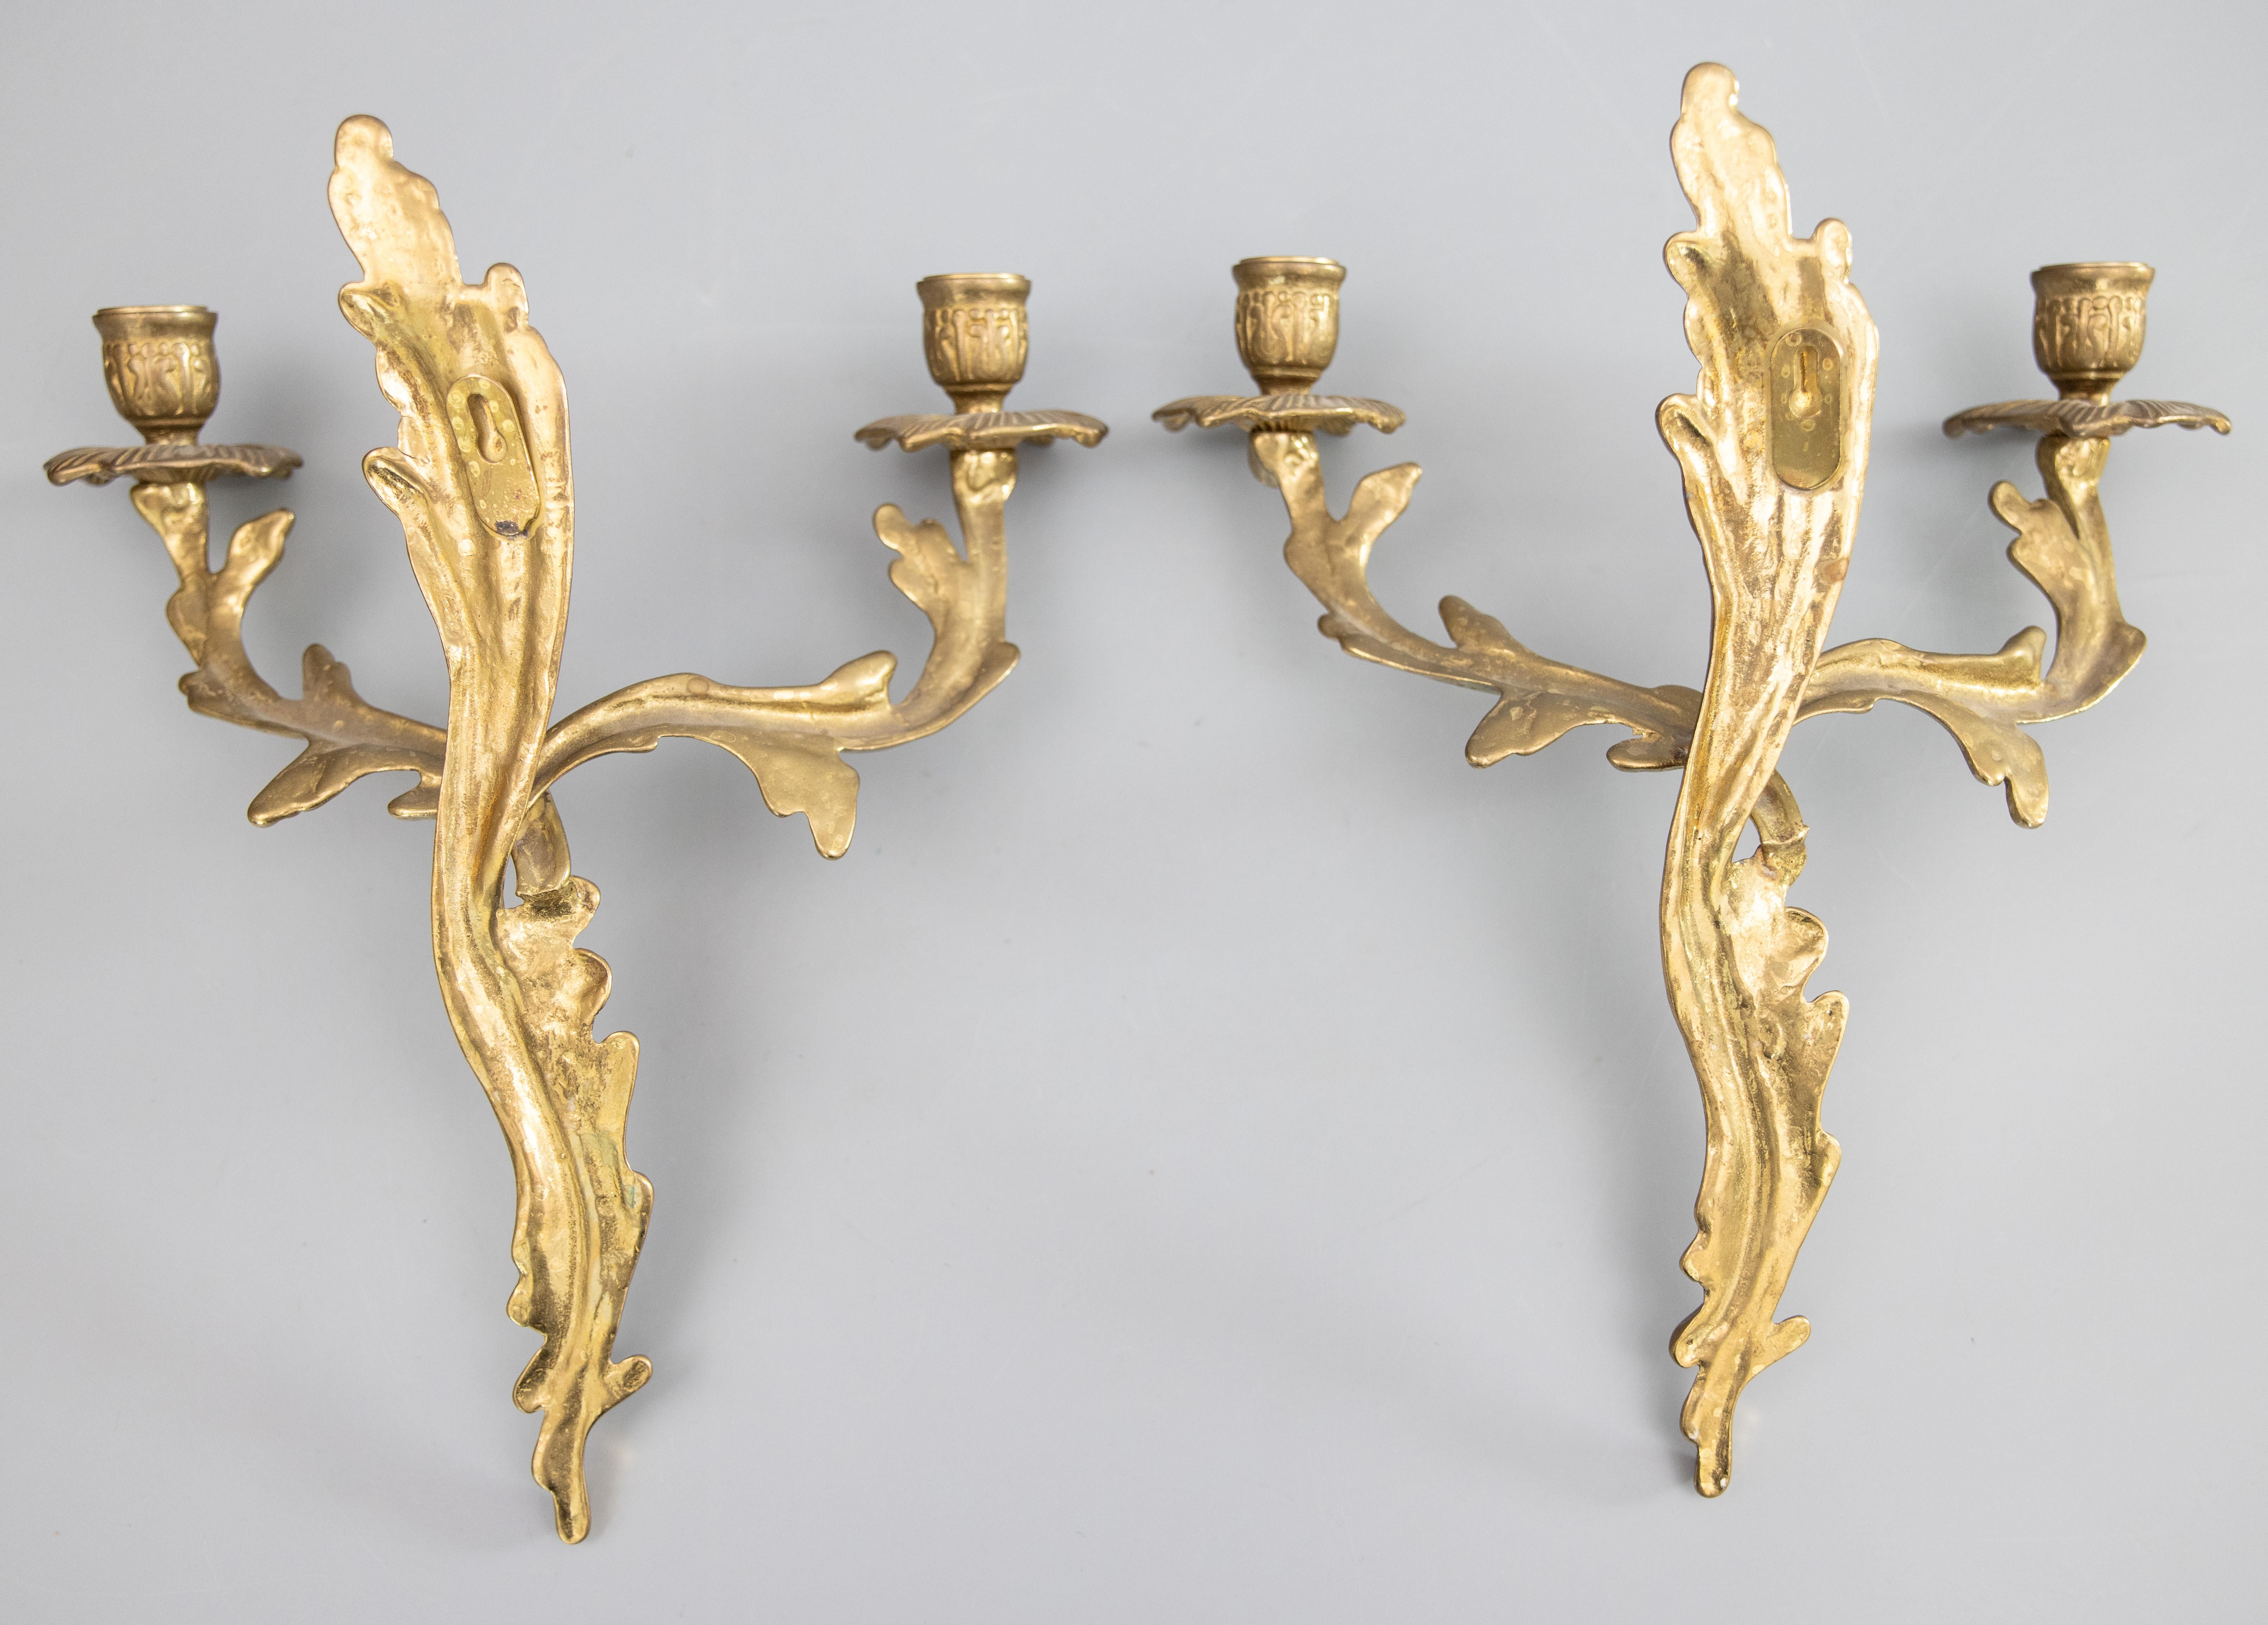 Pair of Antique French Rococo Style Gilt Brass Candelabras Wall Candle Sconces For Sale 5